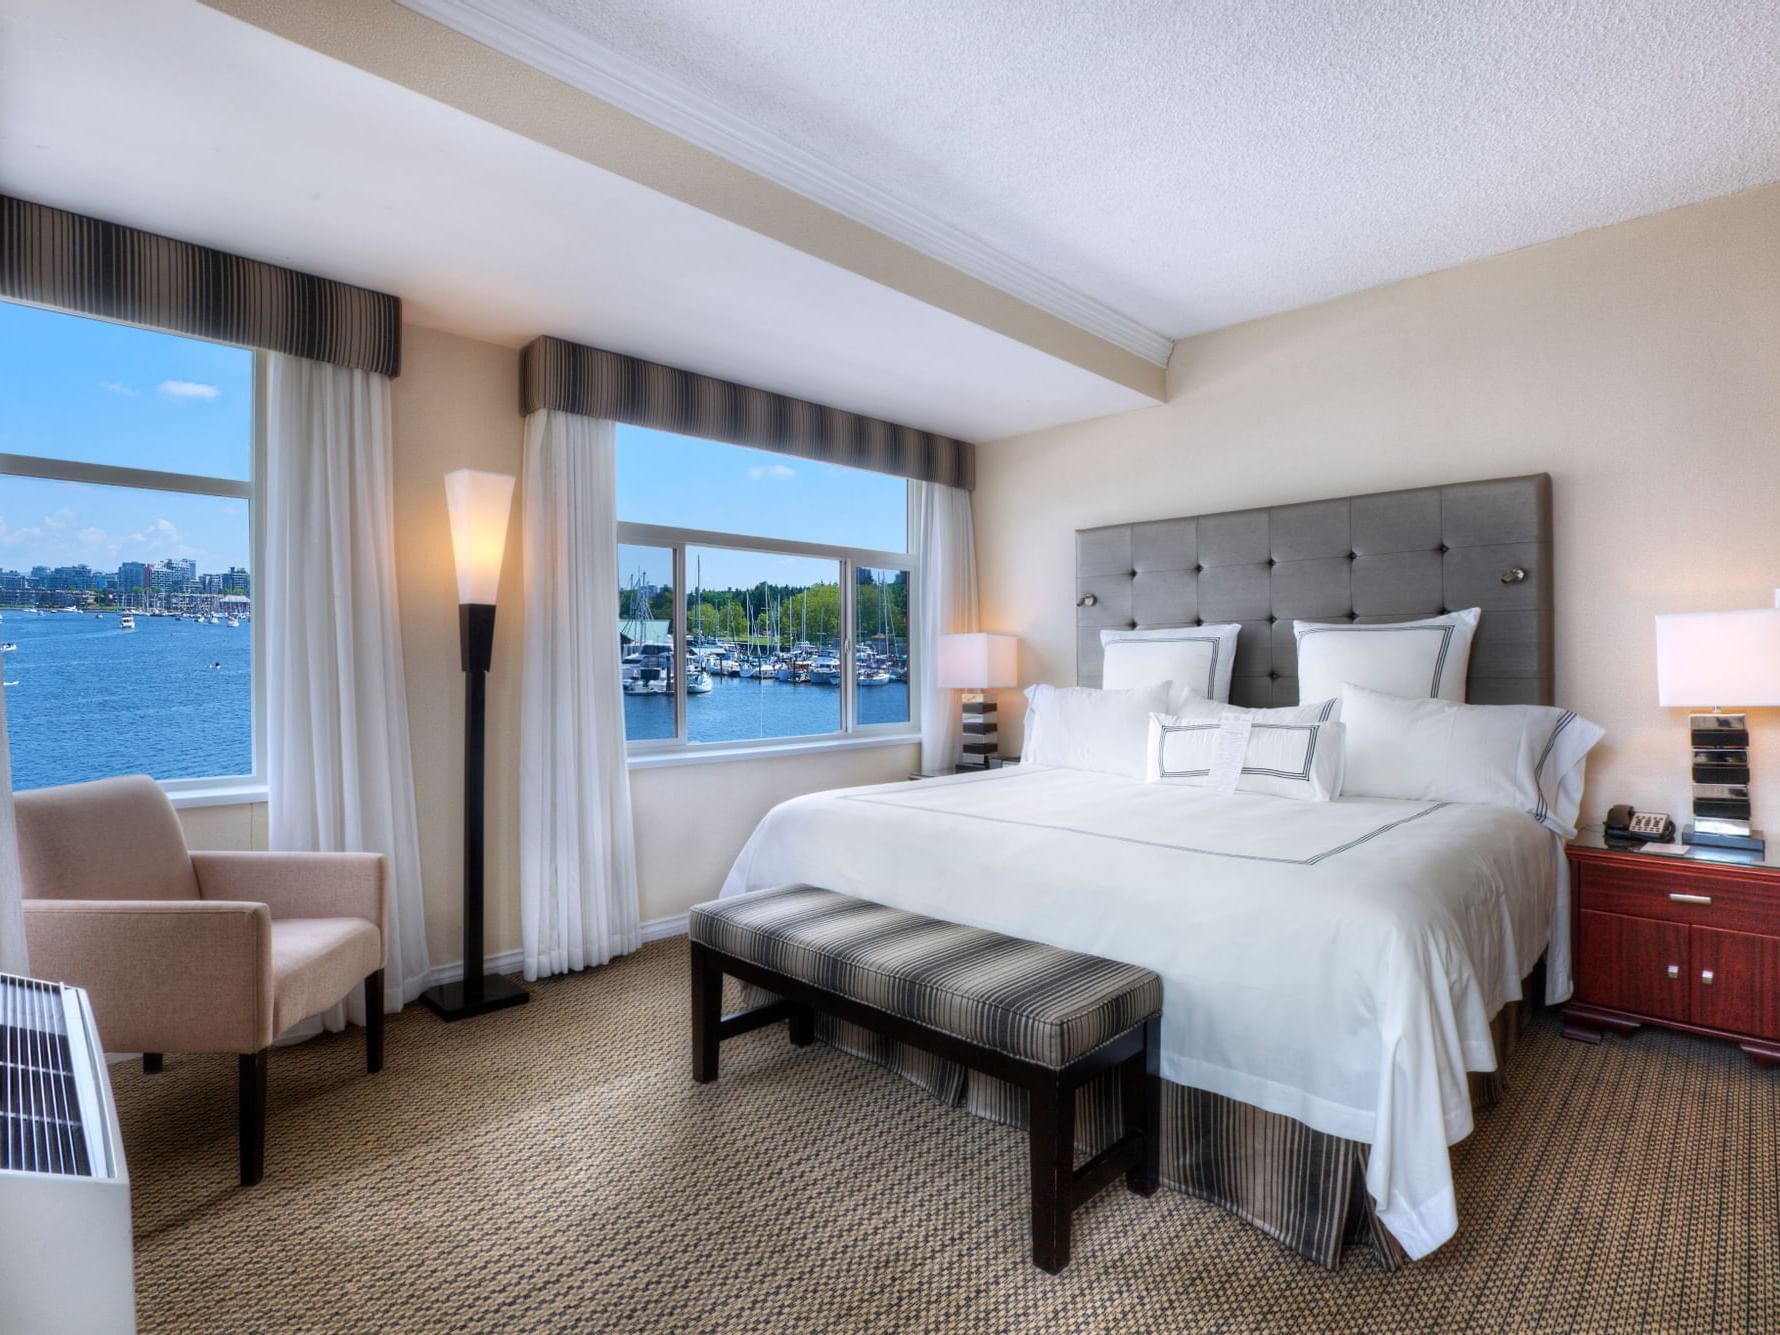 Superior Waterfront Rooms bedroom at Granville Island Hotel
